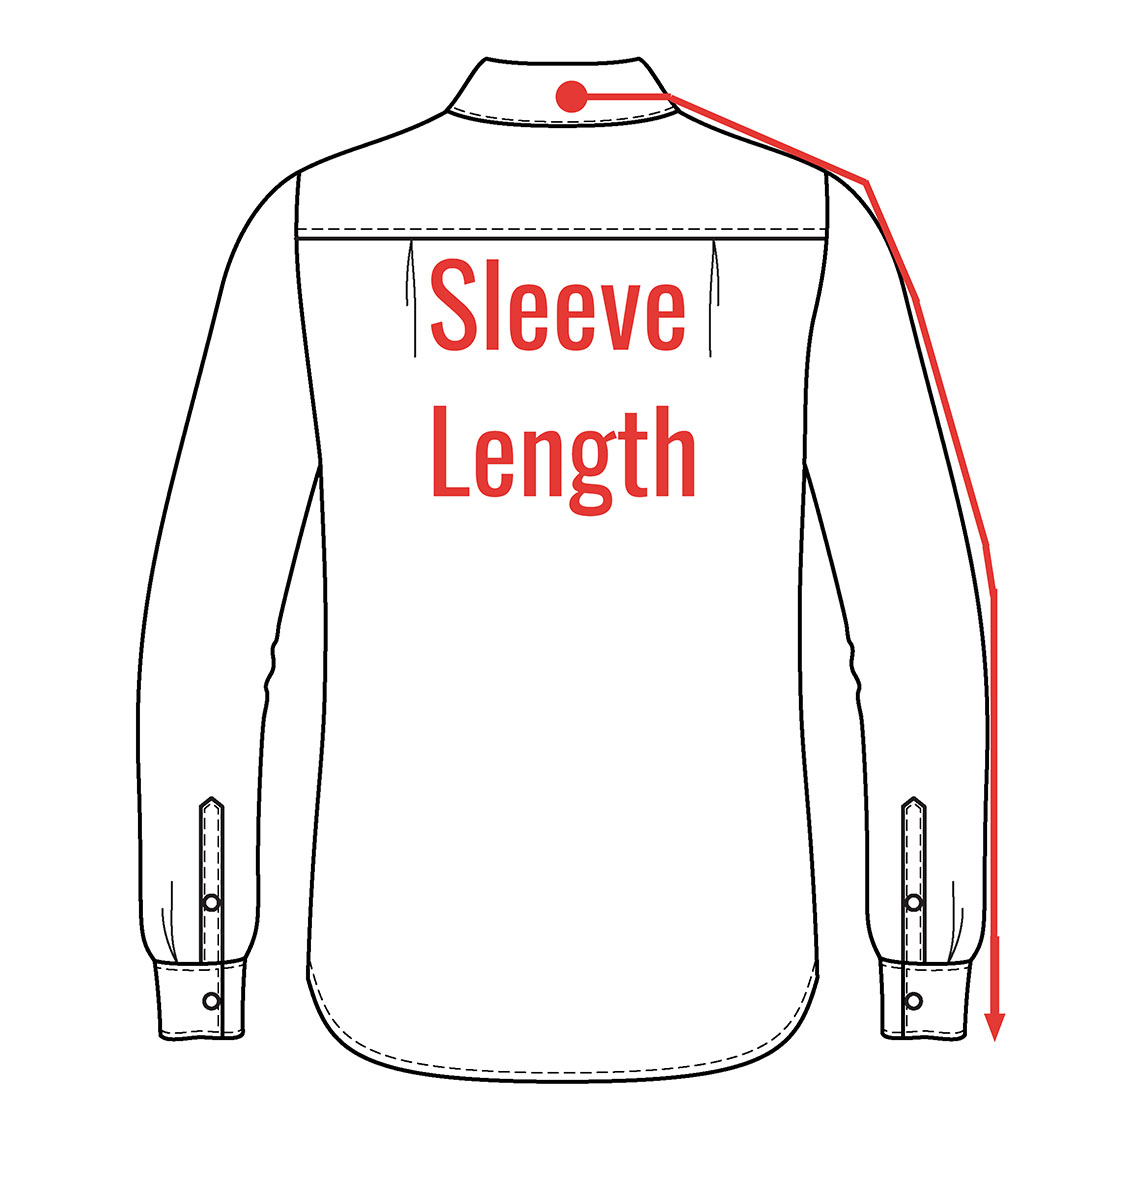 Sizing How To Find Your Proper Inseam Size Under 5 10